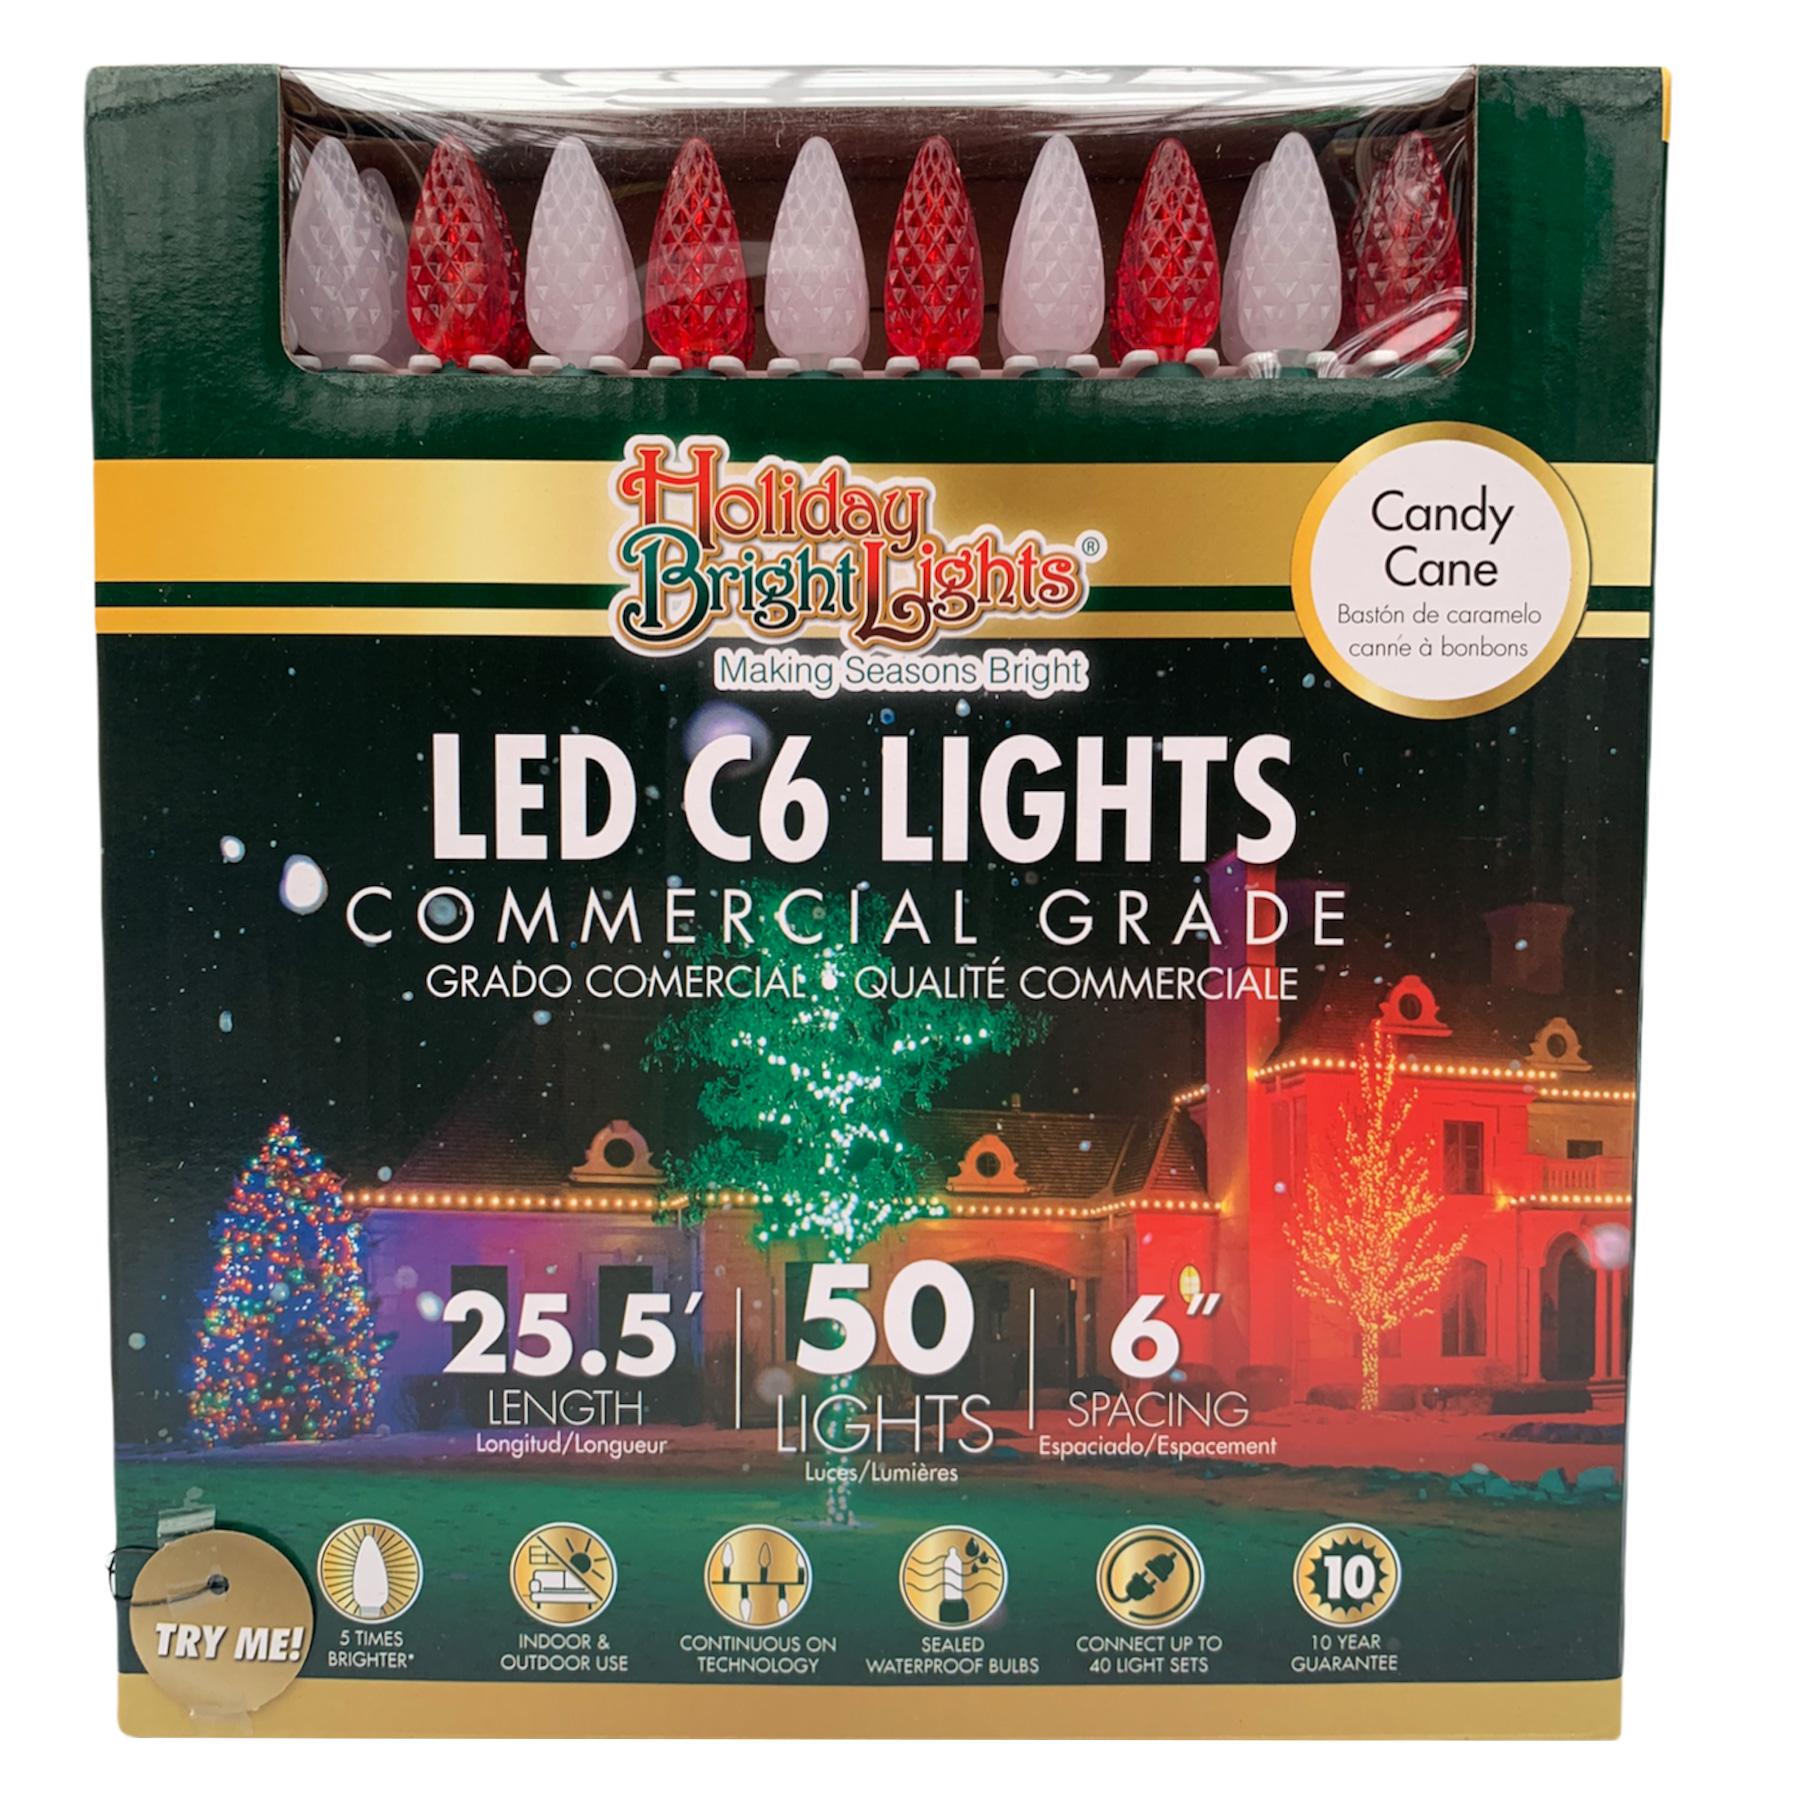 Led C6 Commercial Grade 50 Lights 25 5, Holiday Bright Lights Commercial Grade